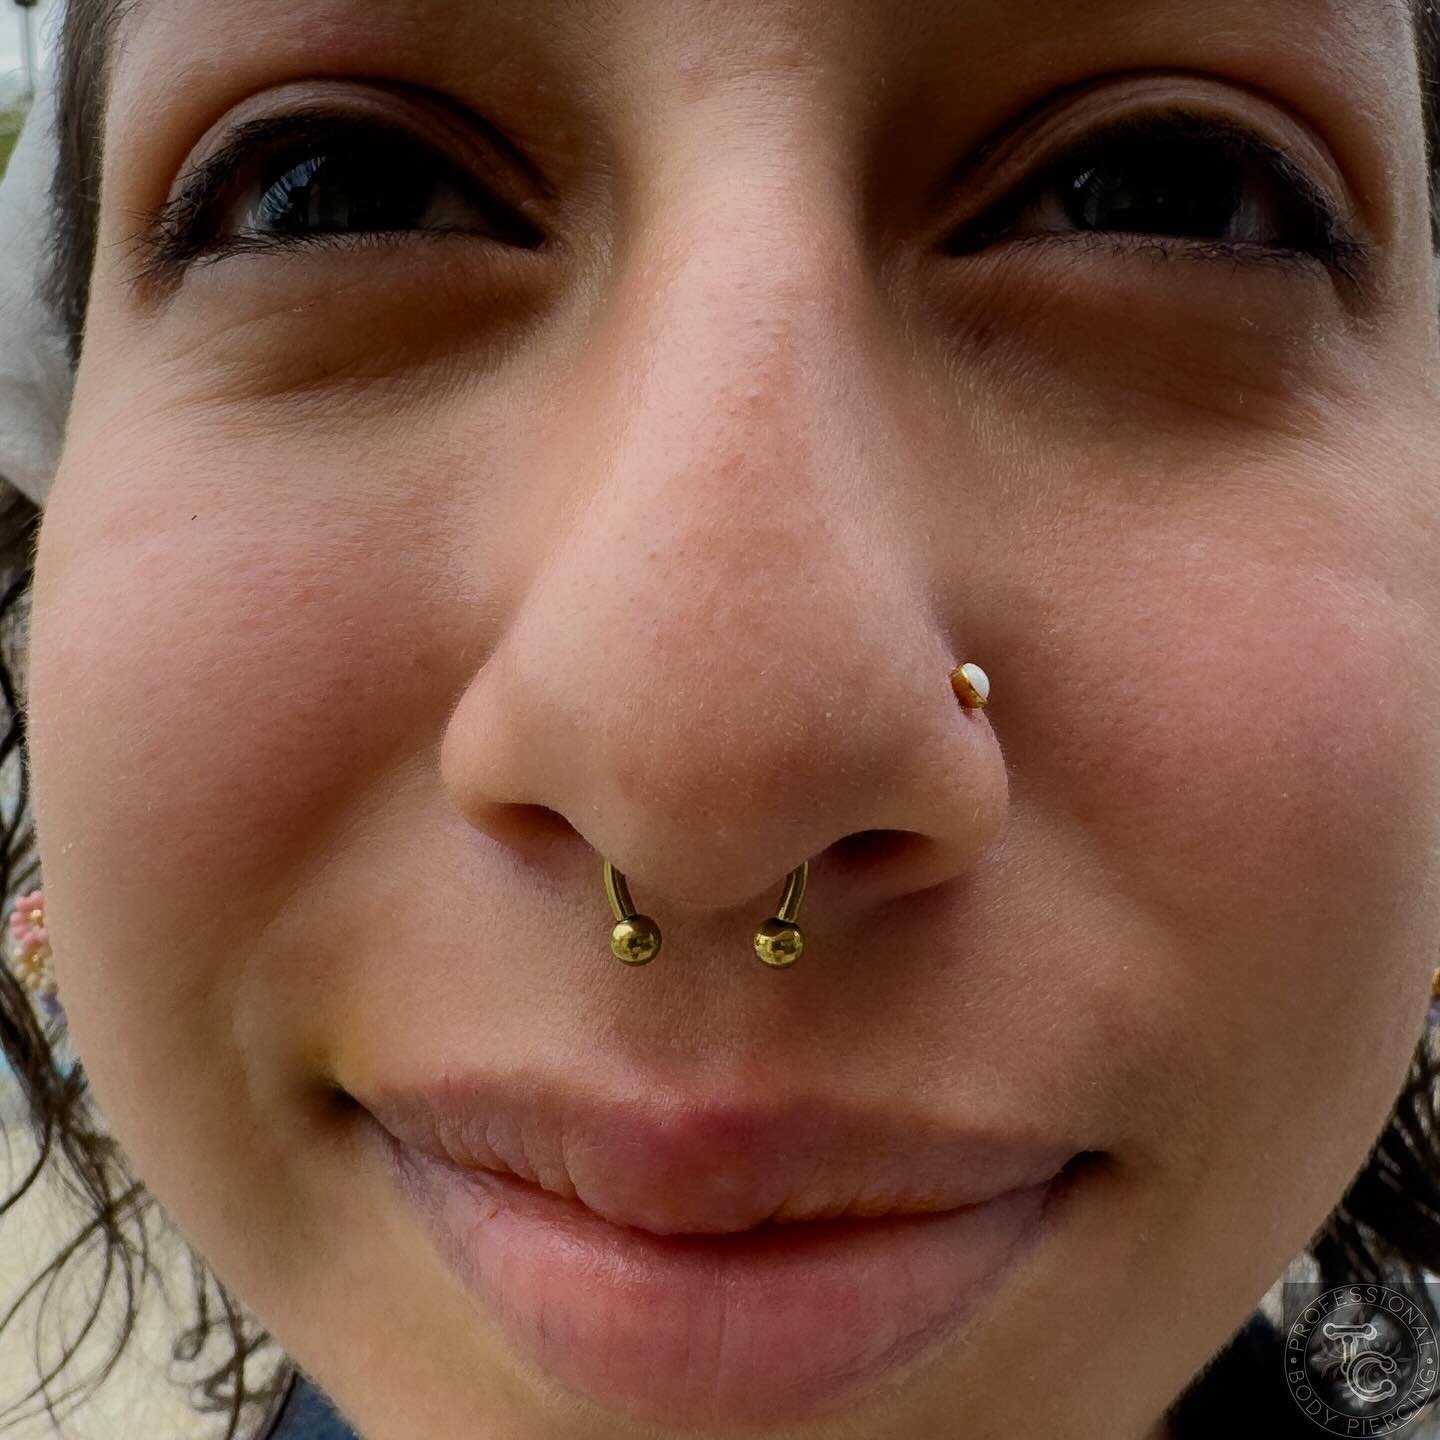 Freehand septum from today.
@ohmygodmani was one of the winners of the free septum piercing fee giveaway! Thanks for the trust! 

✨ 16g 3/8&rdquo; implant grade titanium threadless circular barbell from @neometaljewelry anodized to gold in-house